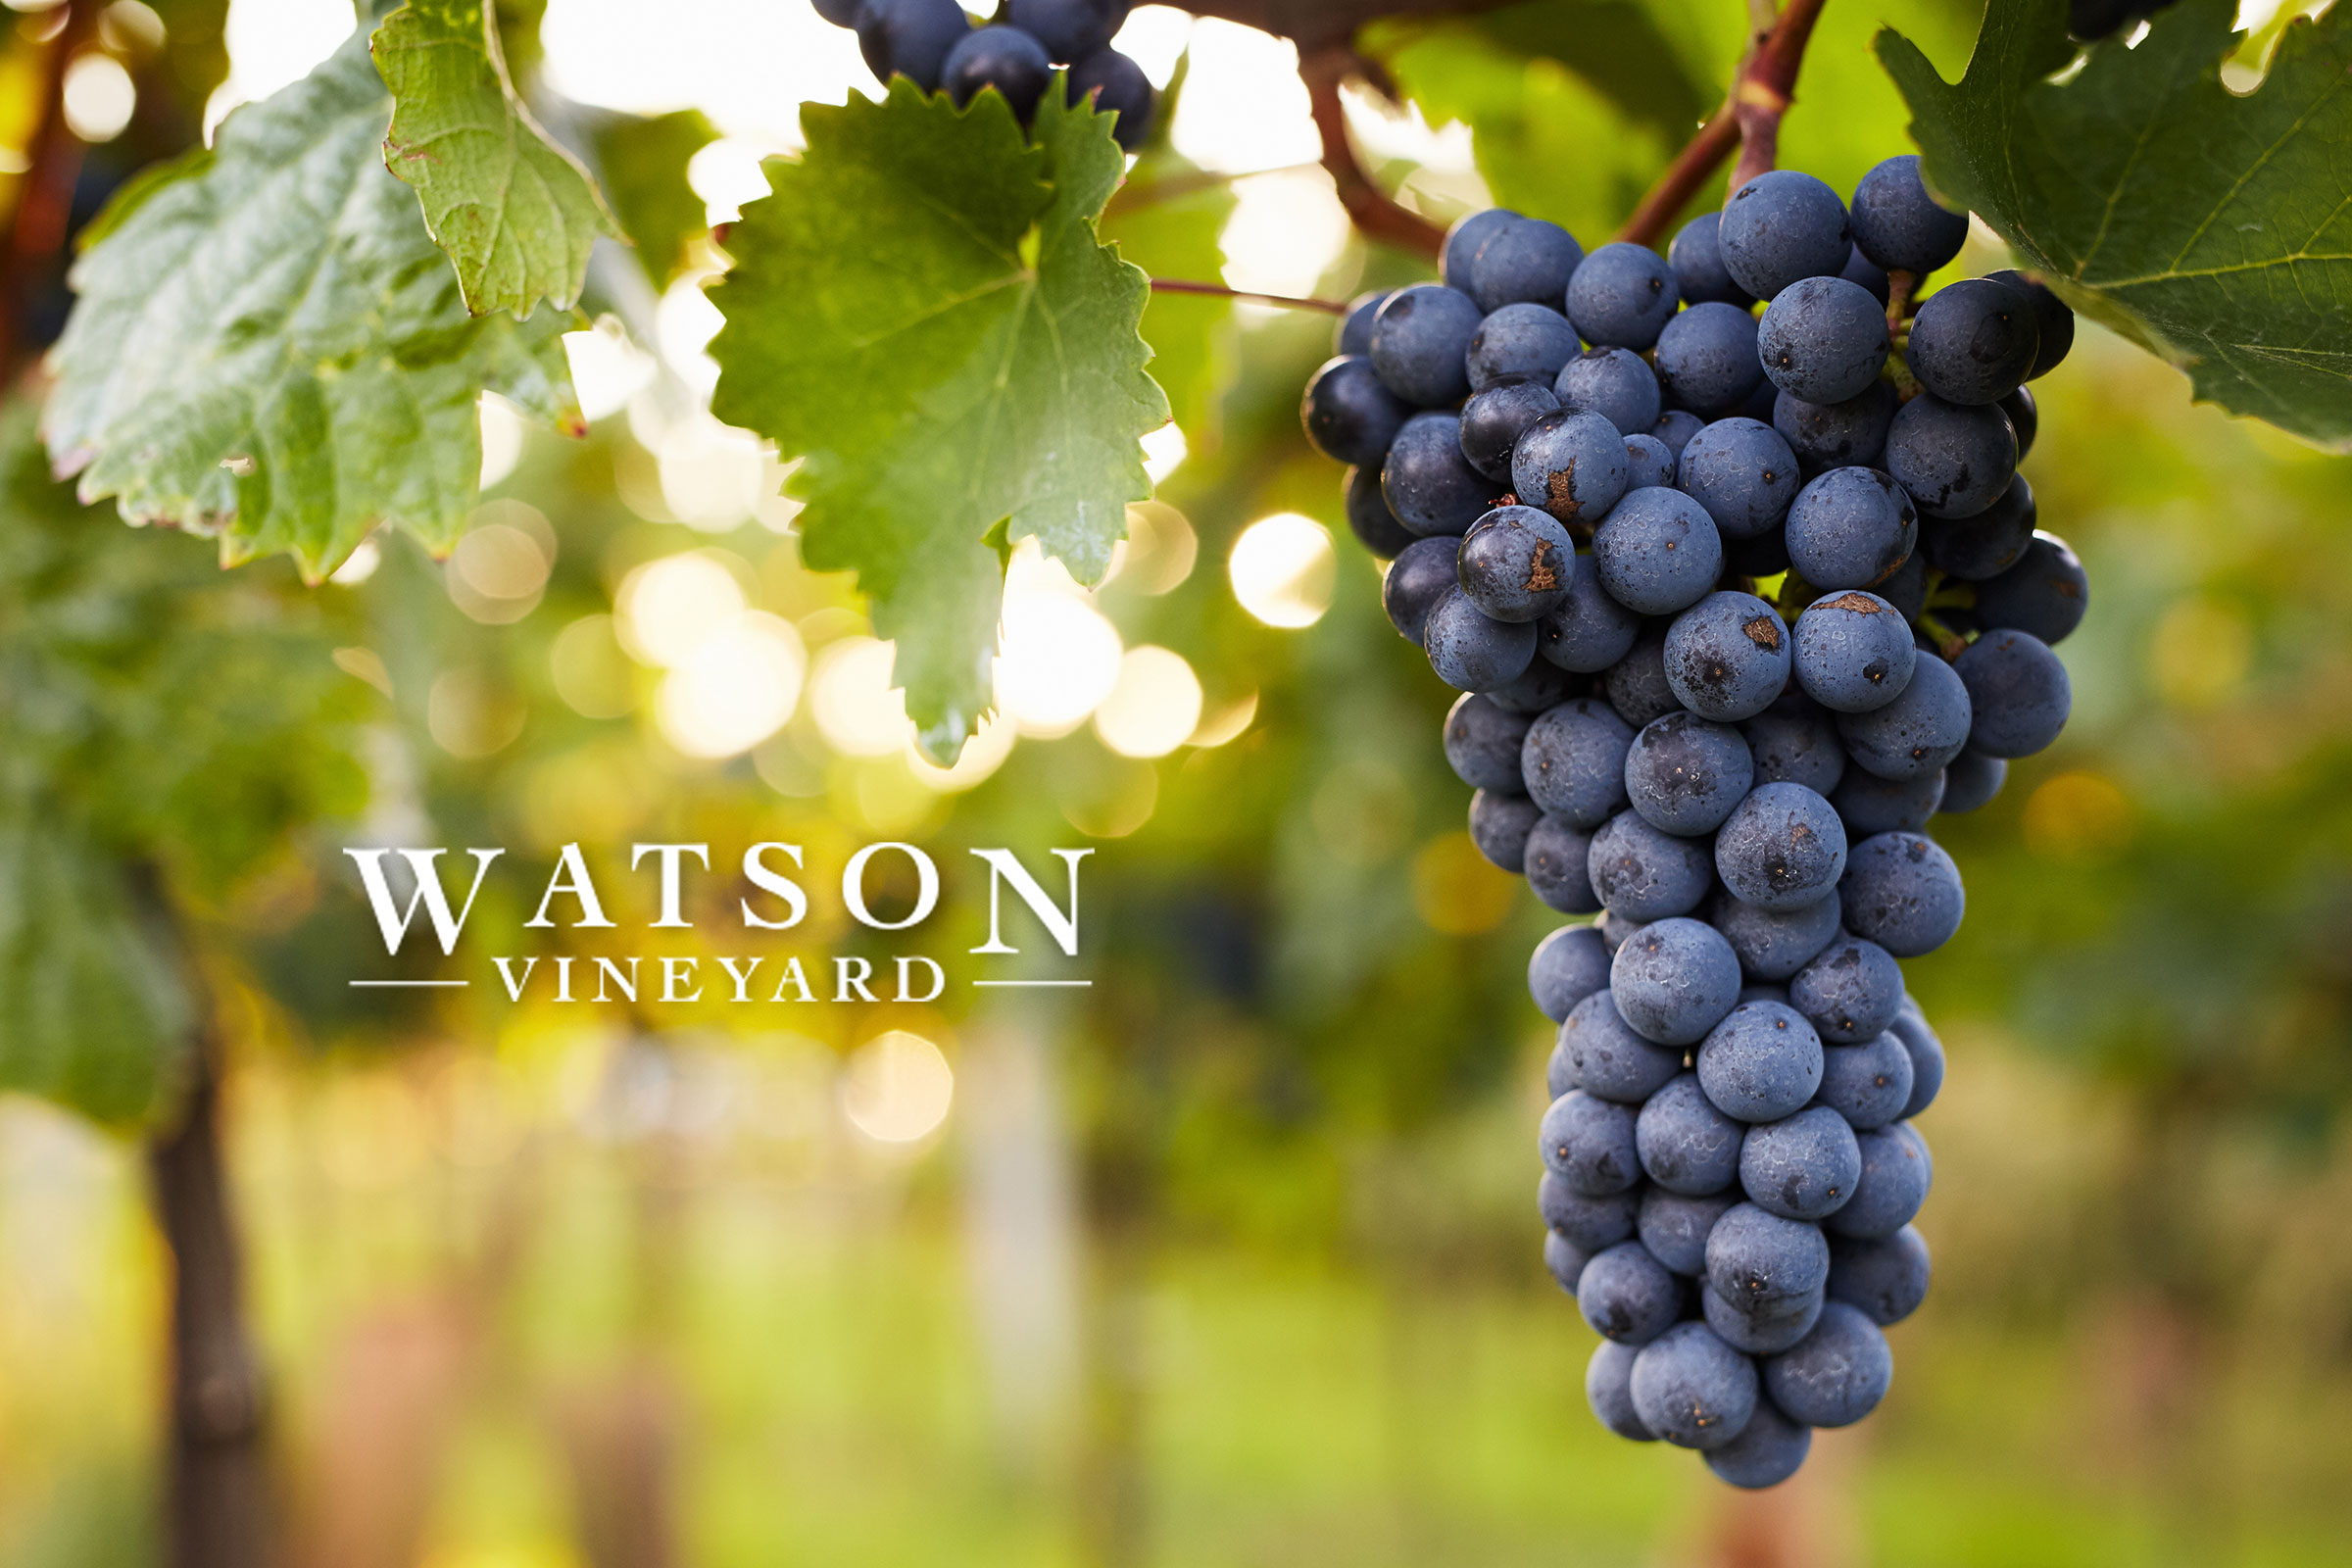 Located in Coleman, Texas, we began developing our vineyard in January of 2011, marking the beginning of our life-long love of growing grapes and producing quality and enjoyable wine for all our fans and future customers!